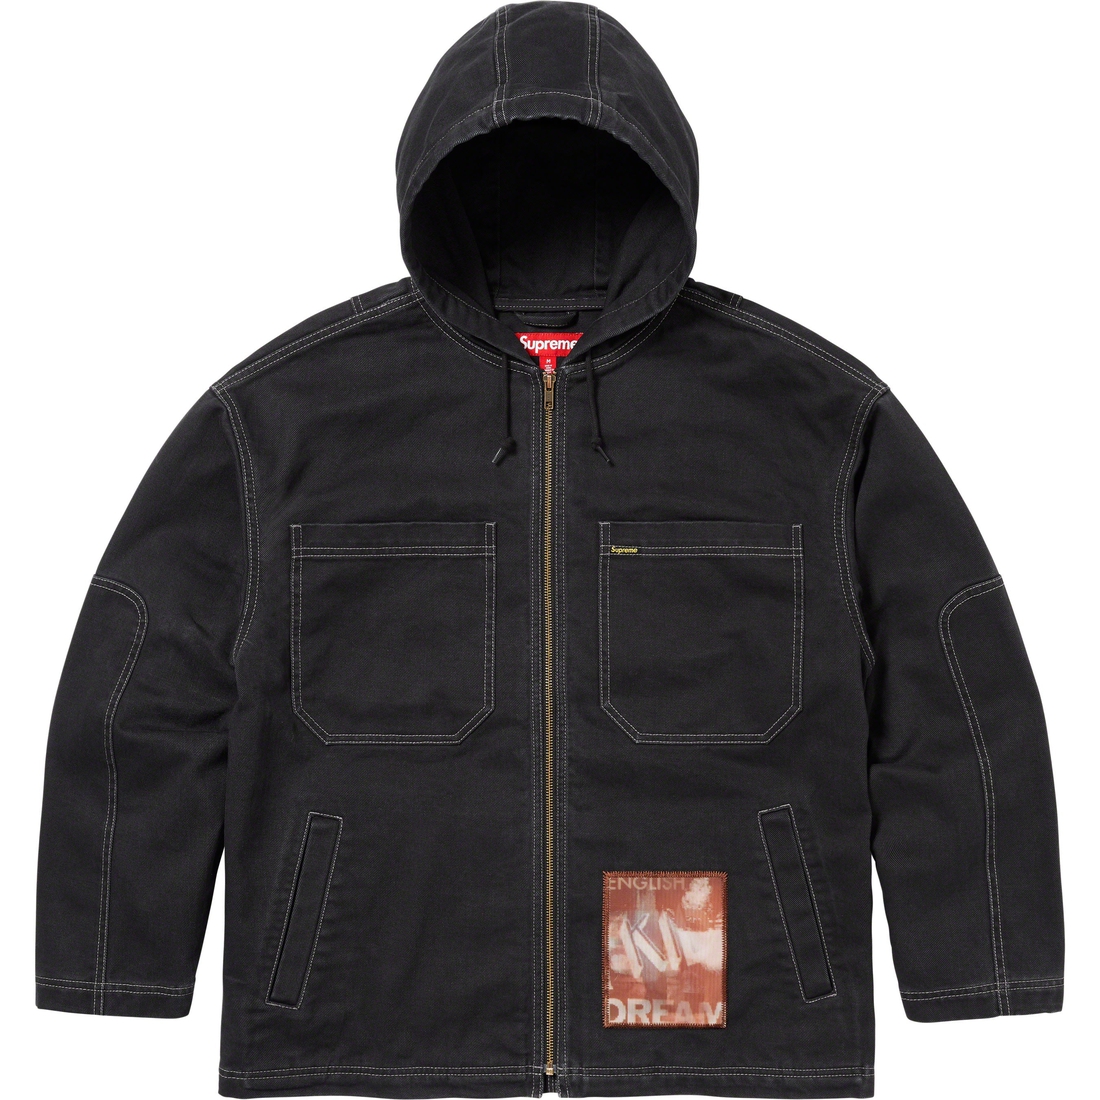 Details on Dream English Kid Hooded Jacket Black from fall winter
                                                    2023 (Price is $198)